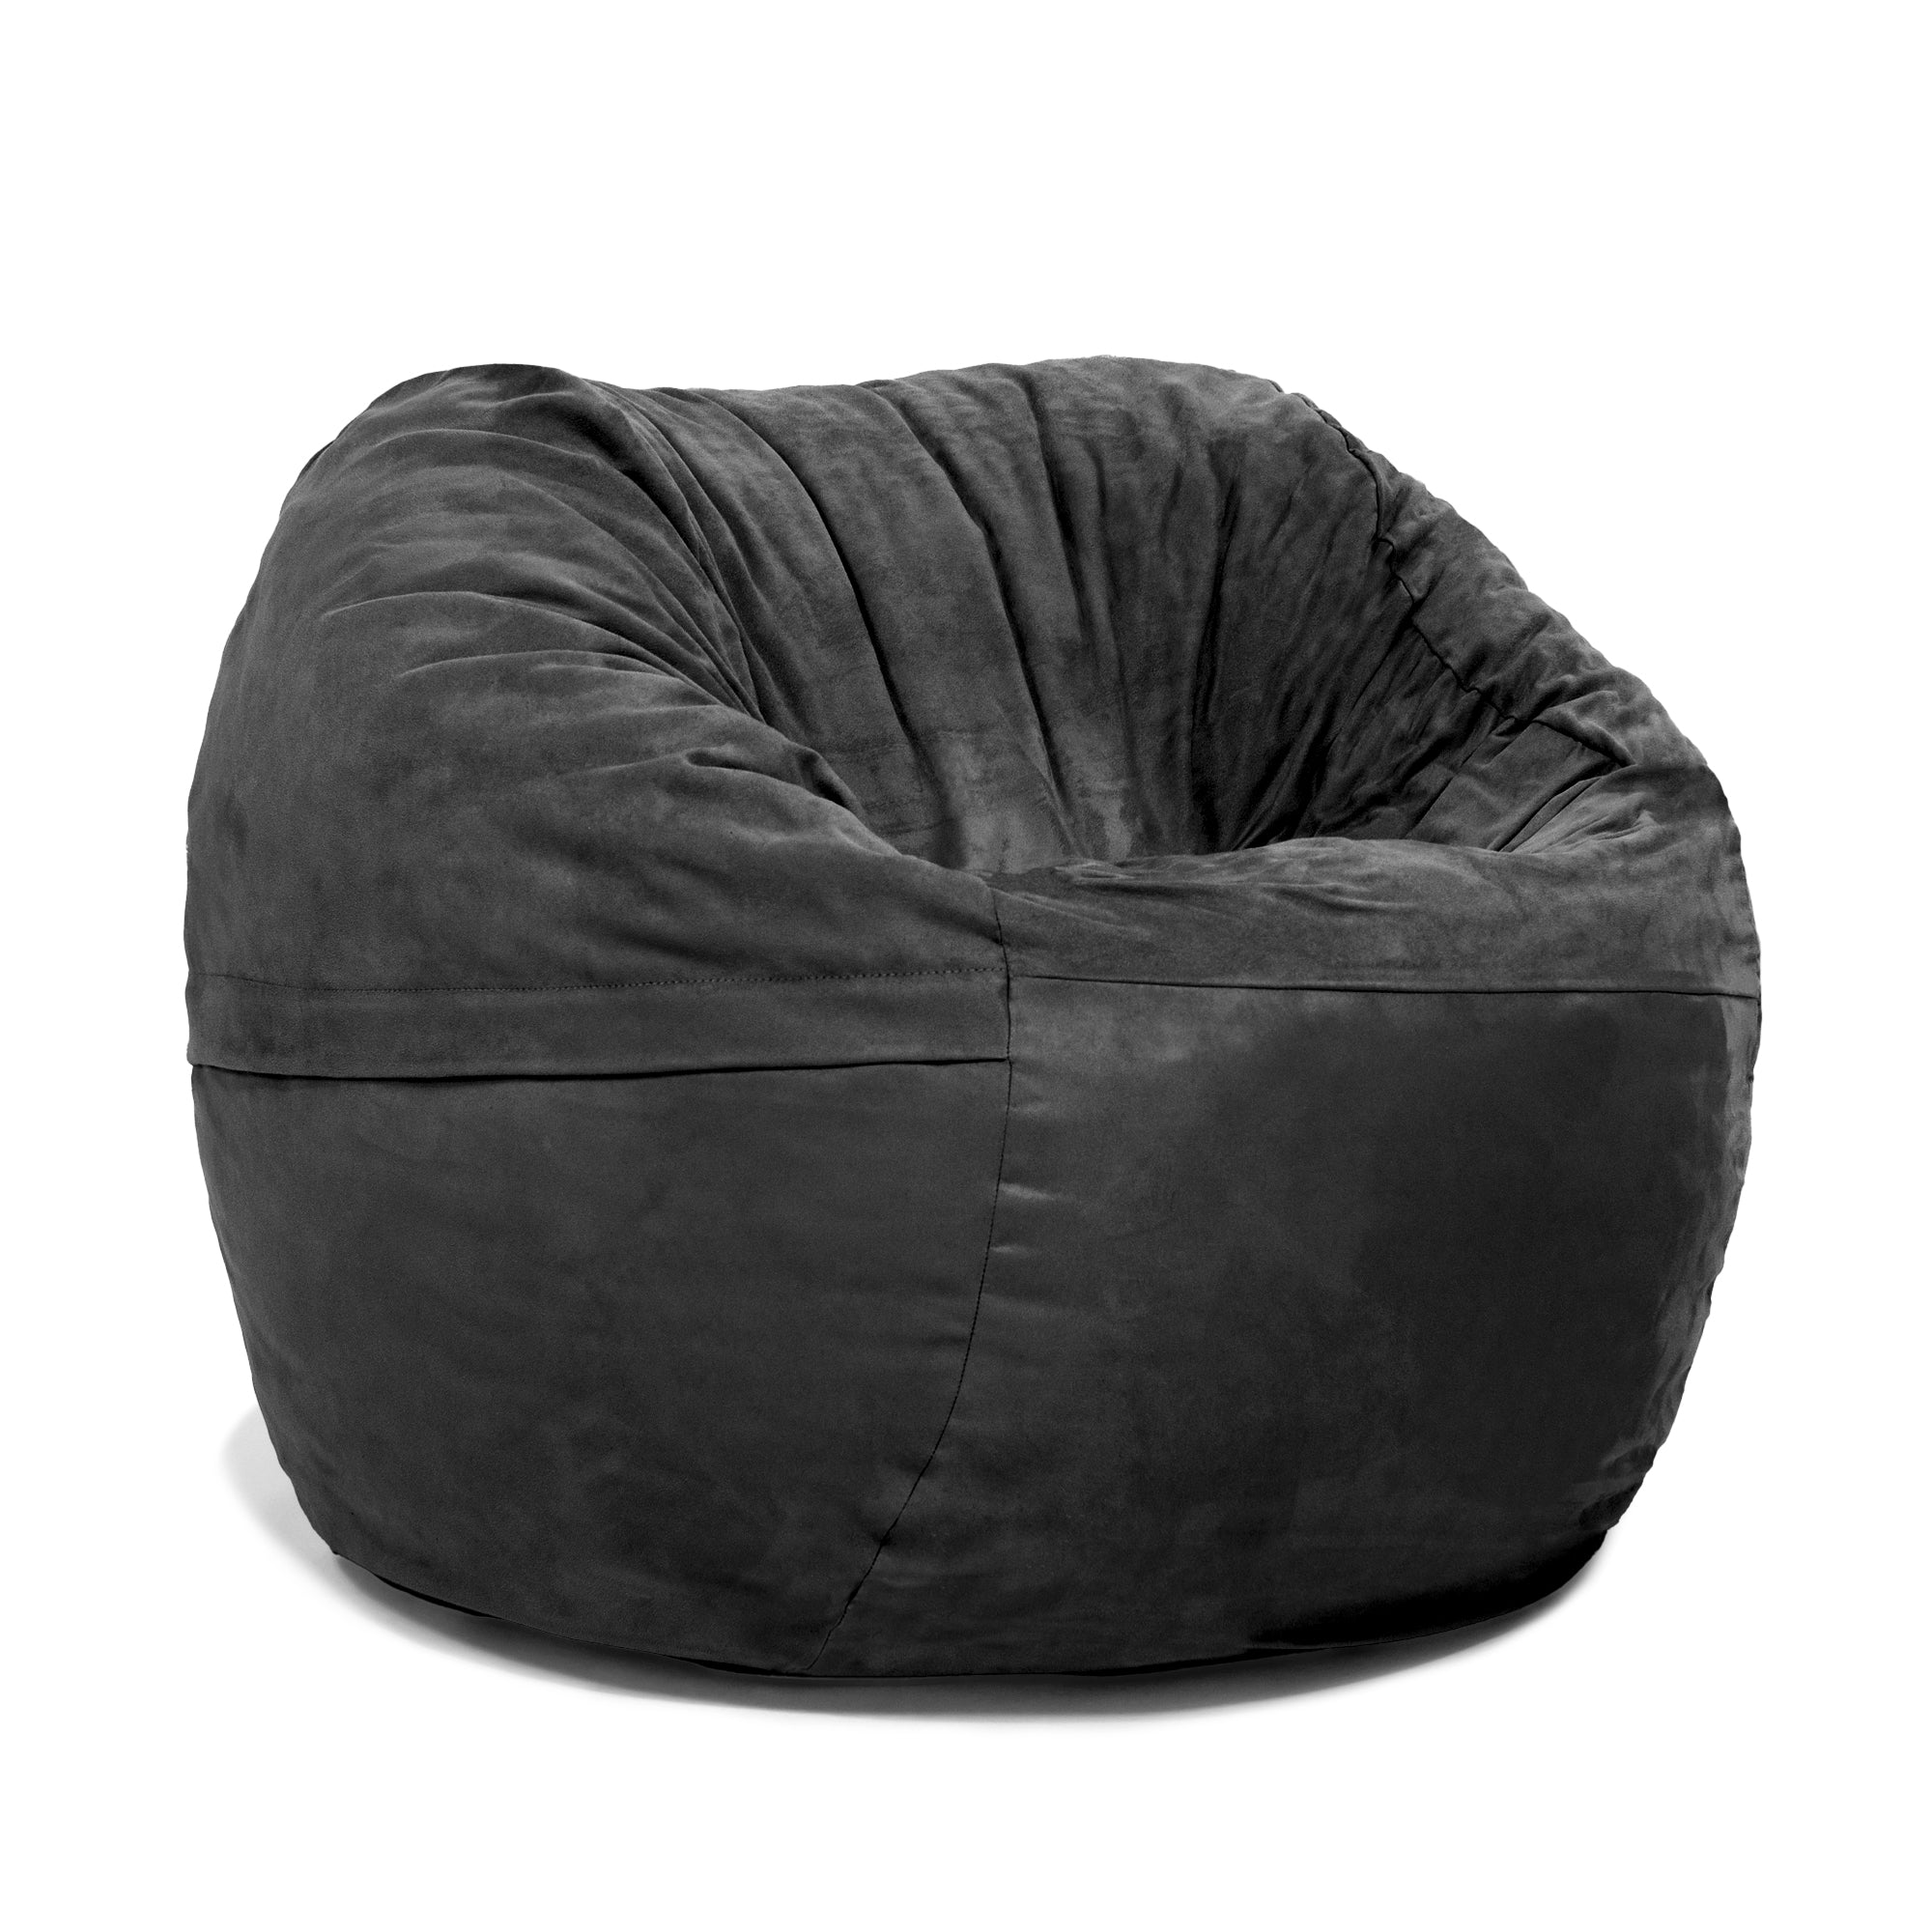 Saxx Round Bean Bag with Removable Cover 3'